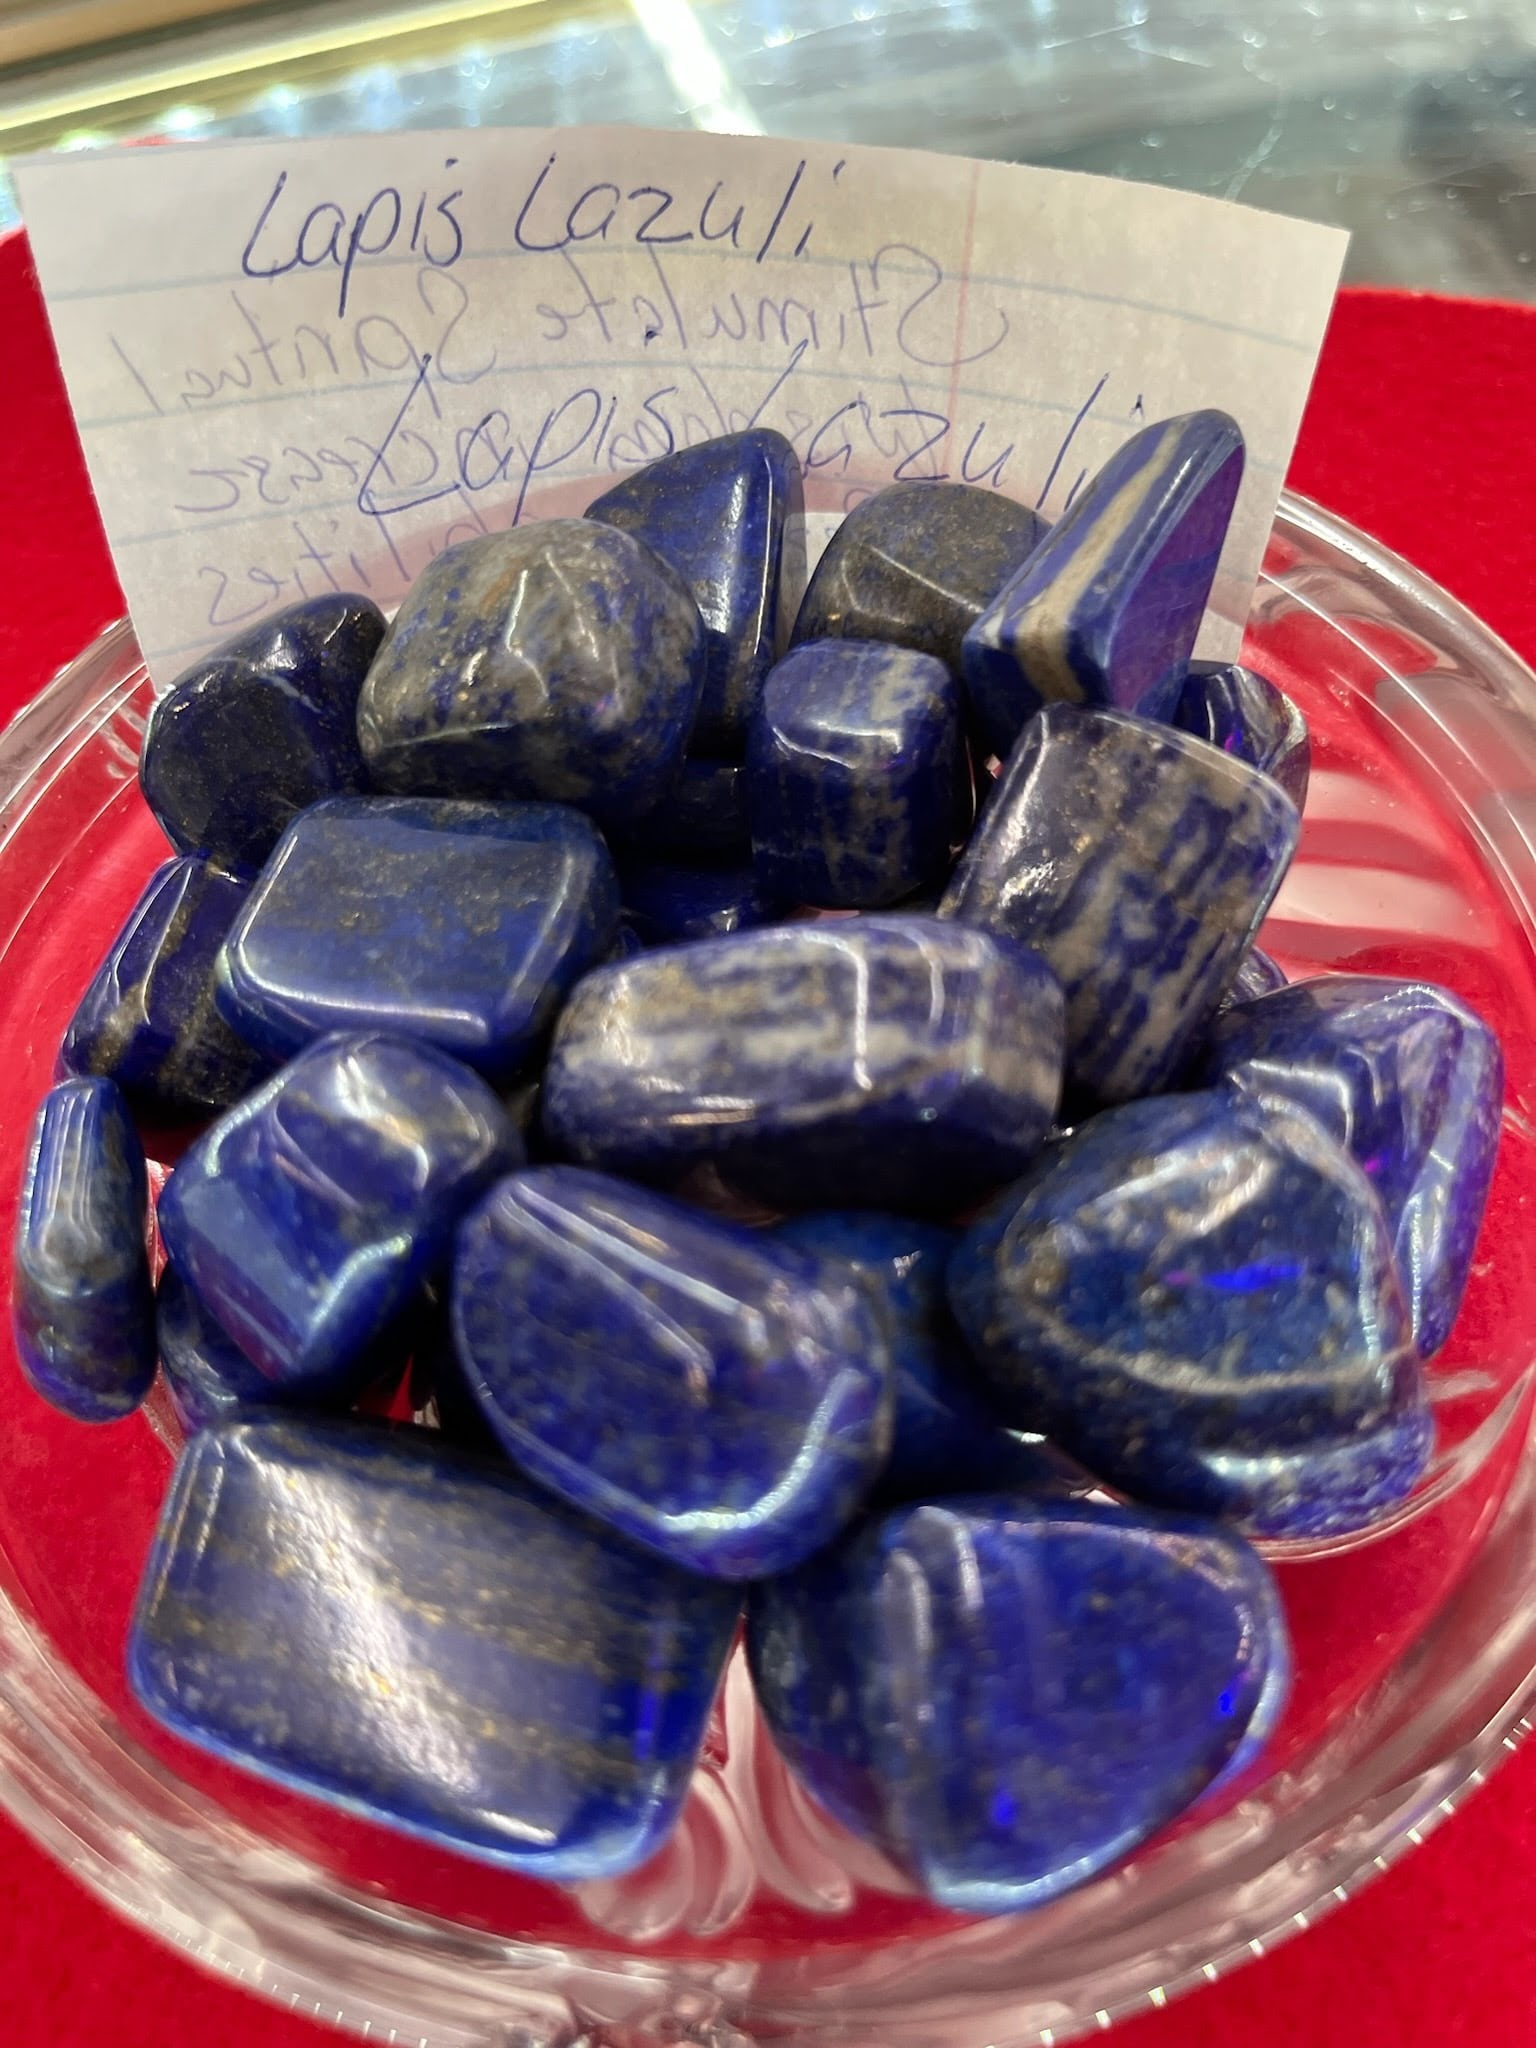 A bowl of blue stones on top of a table.